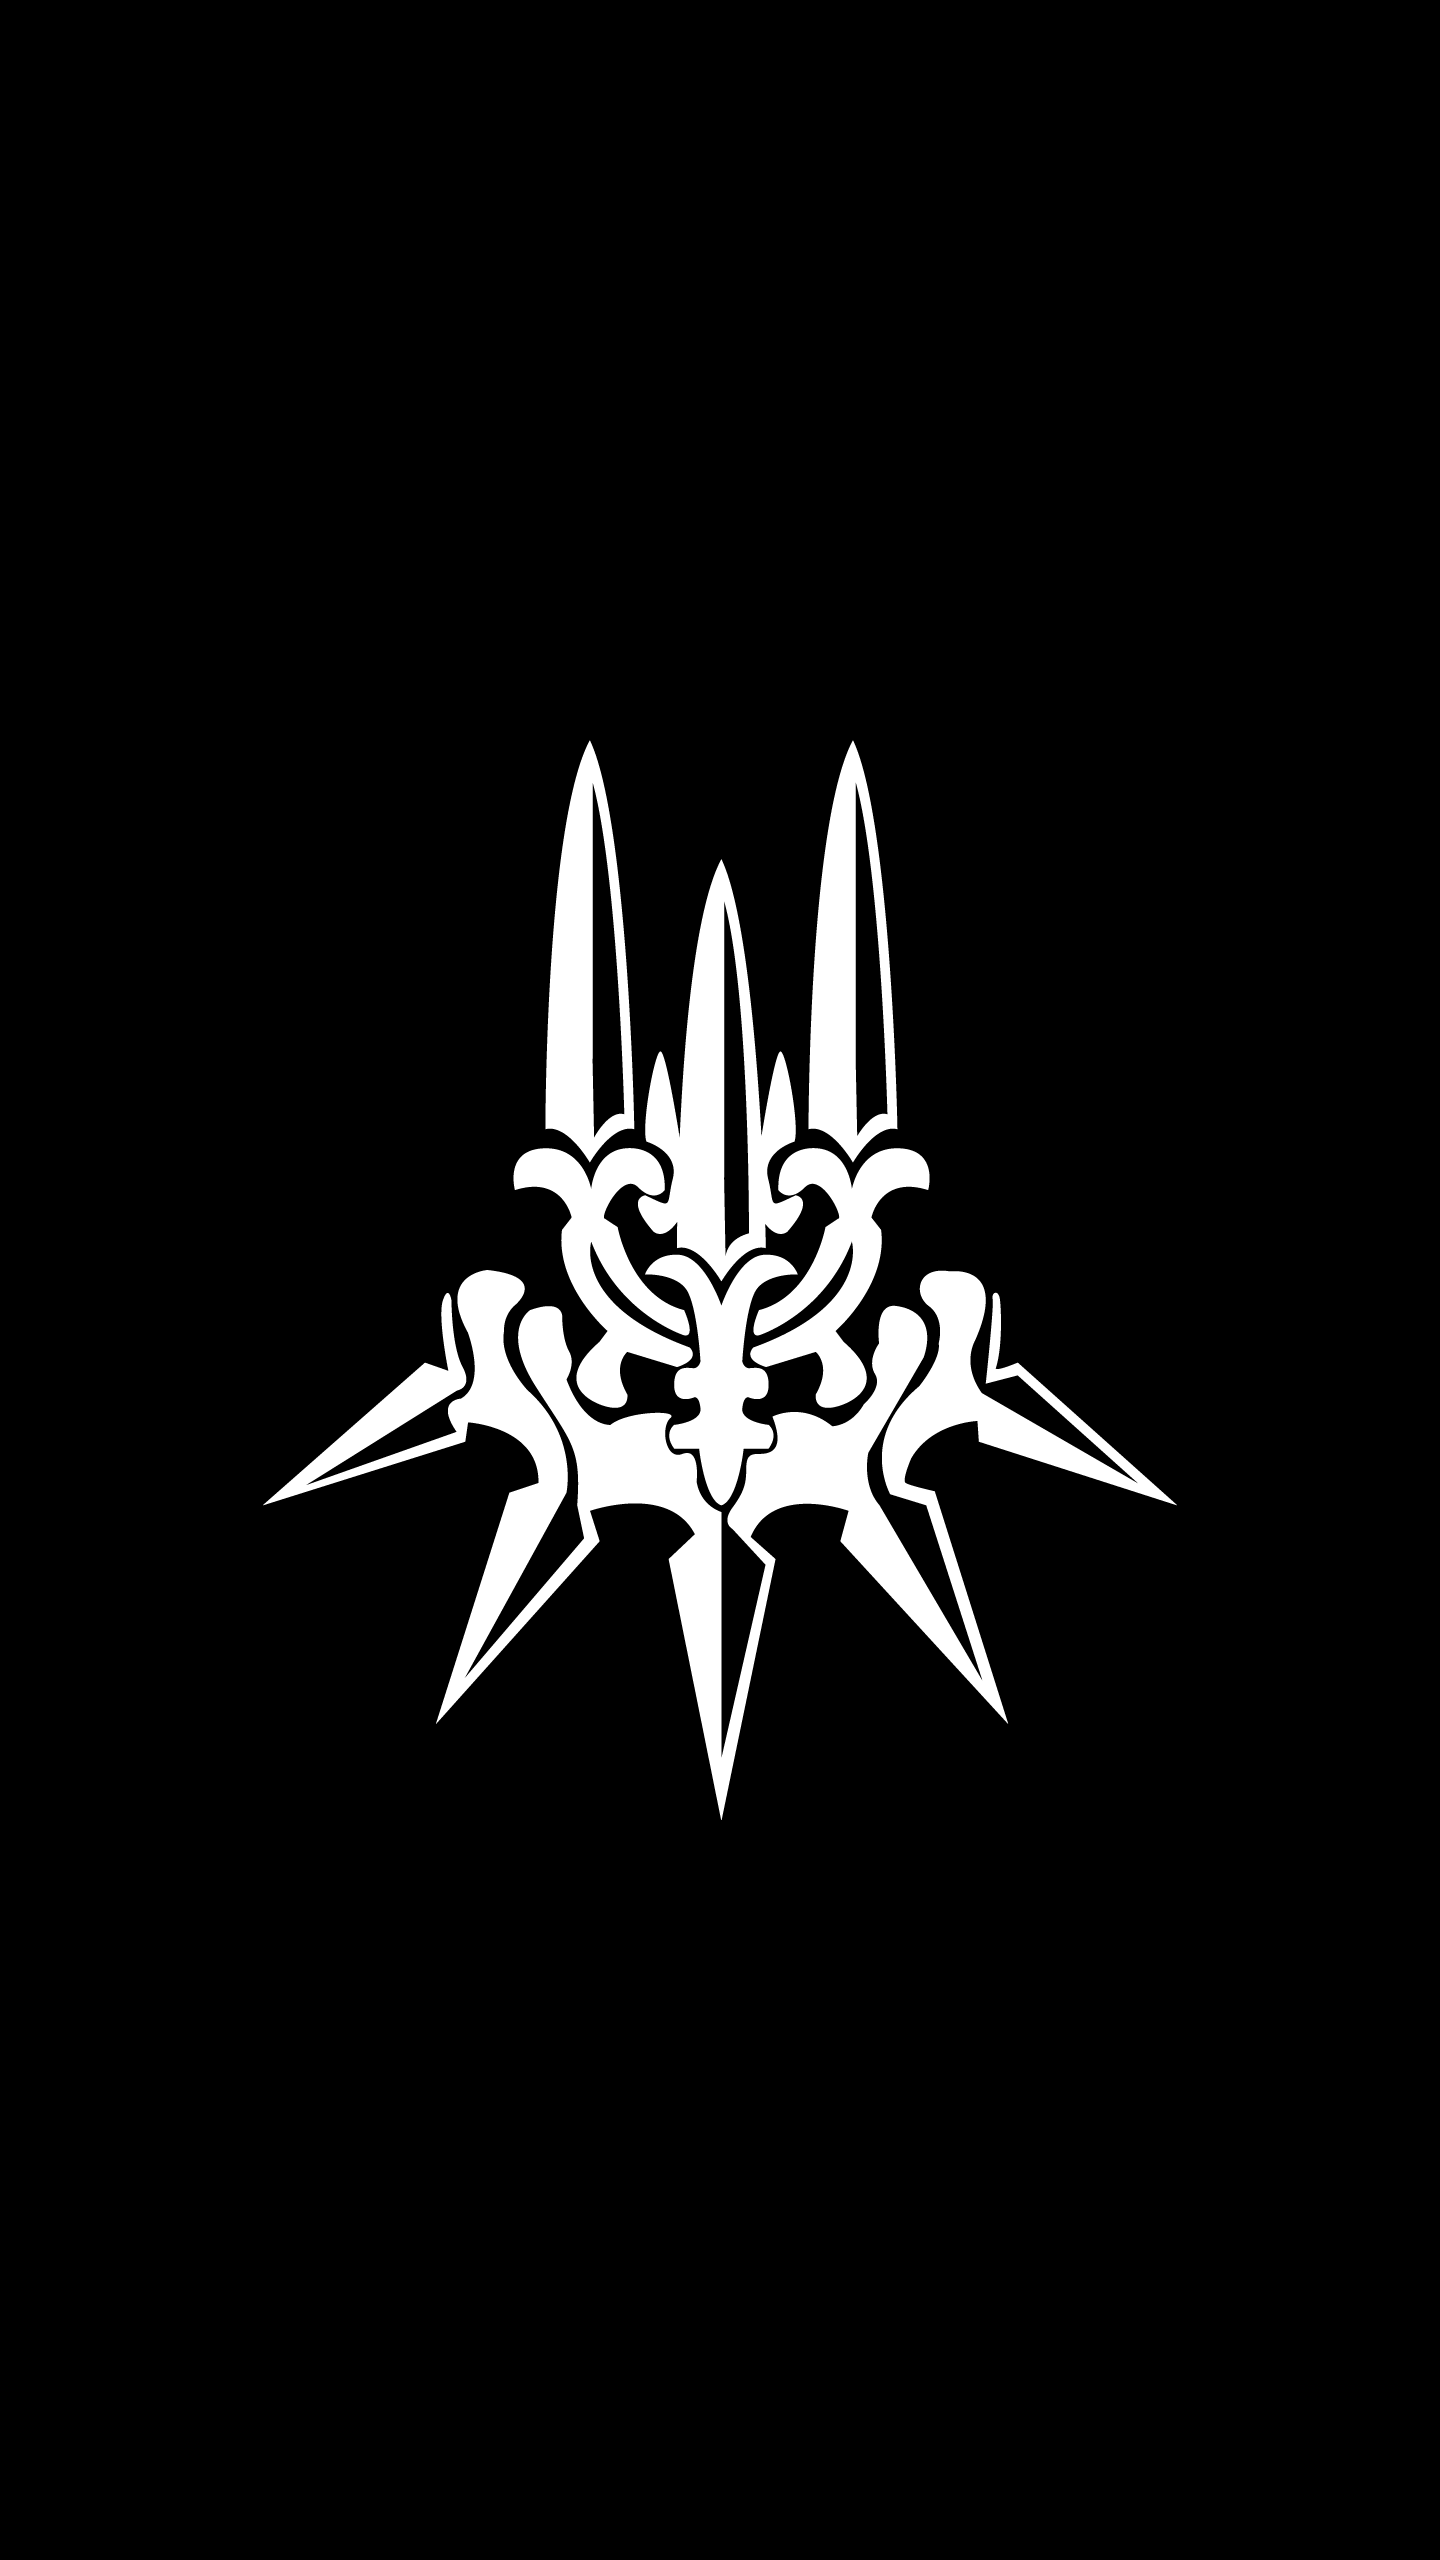 Made an HD YoRHa AMOLED wallpaper thought I'd share it here